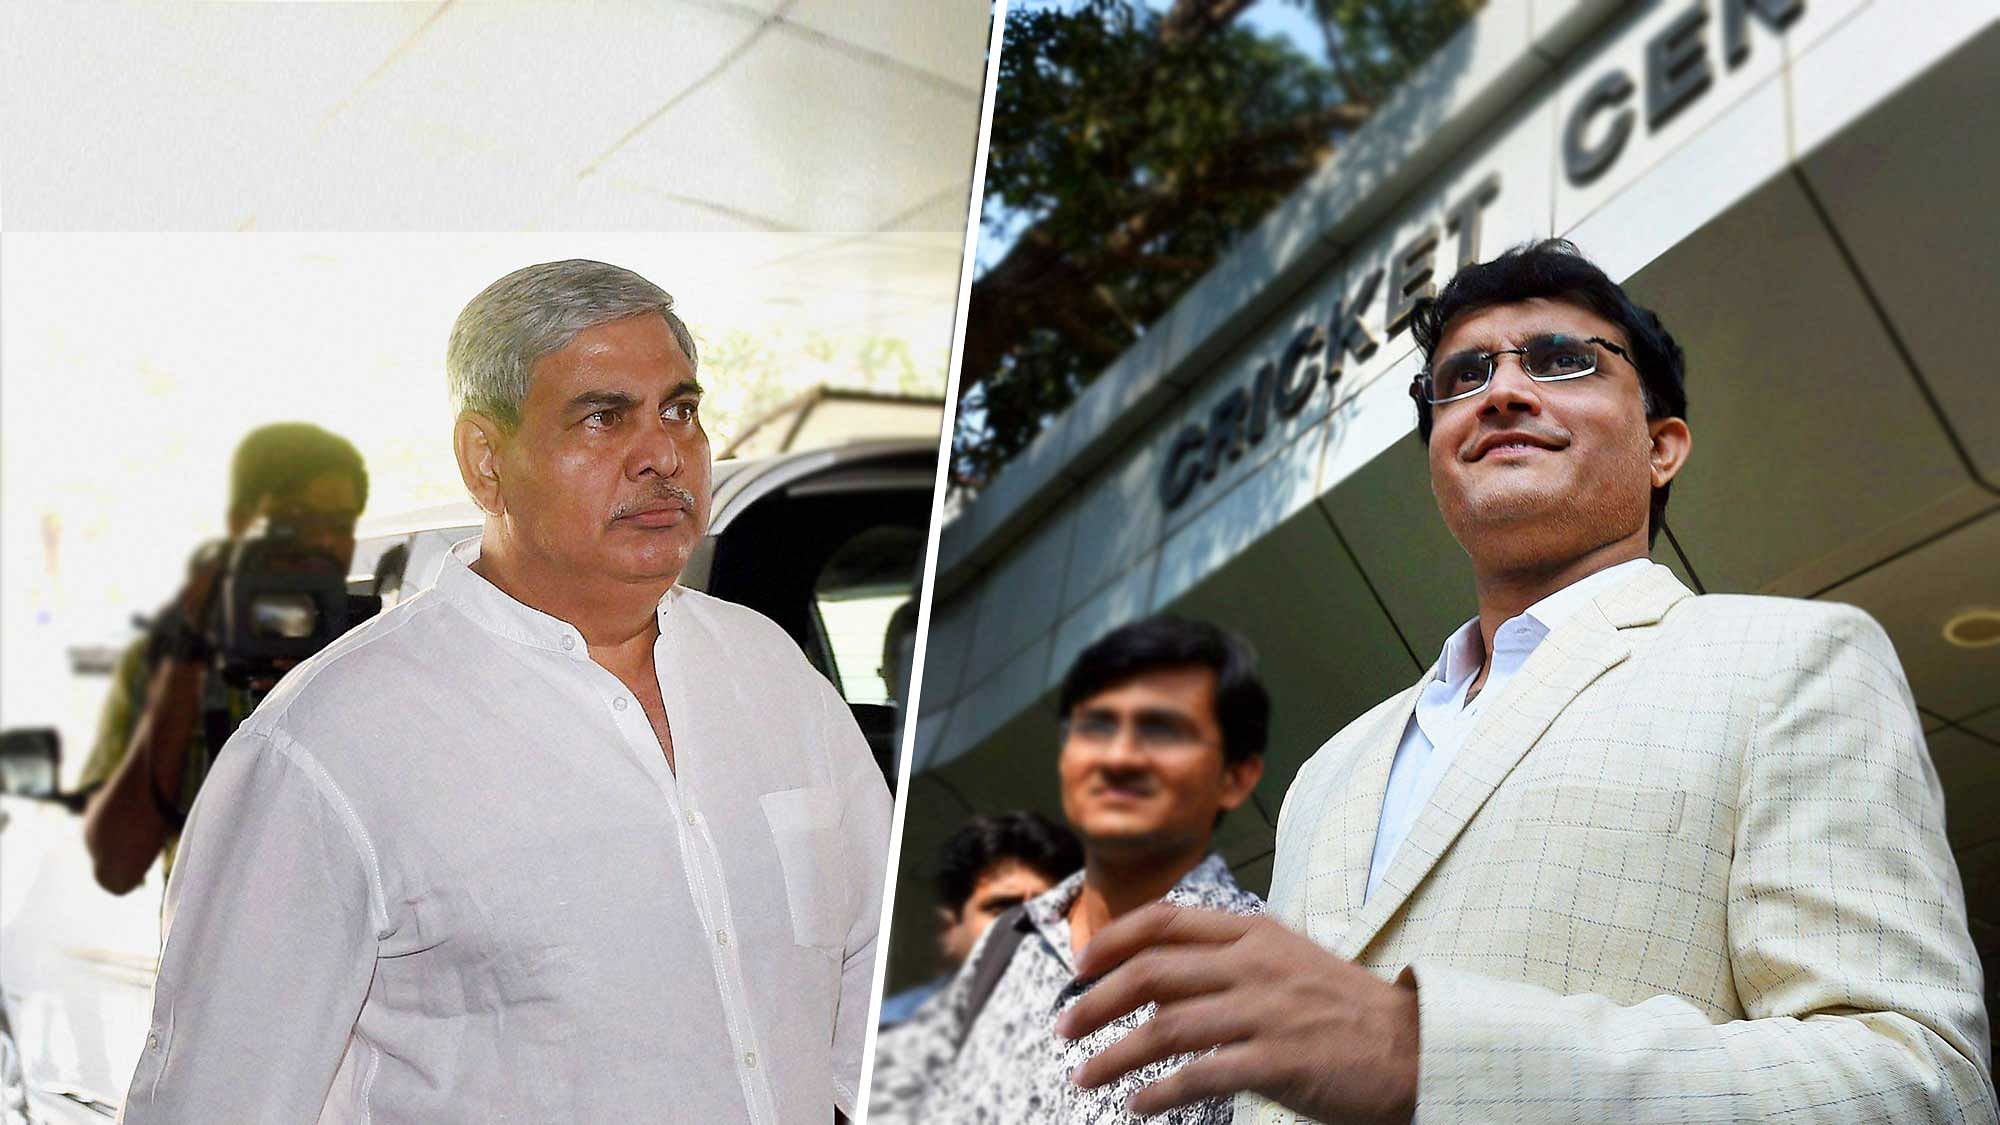 BCCI President Shashank Manohar and CAB Chief Sourav Ganguly both attended the BCCI SGM in Mumbai. (Photo: PTI)